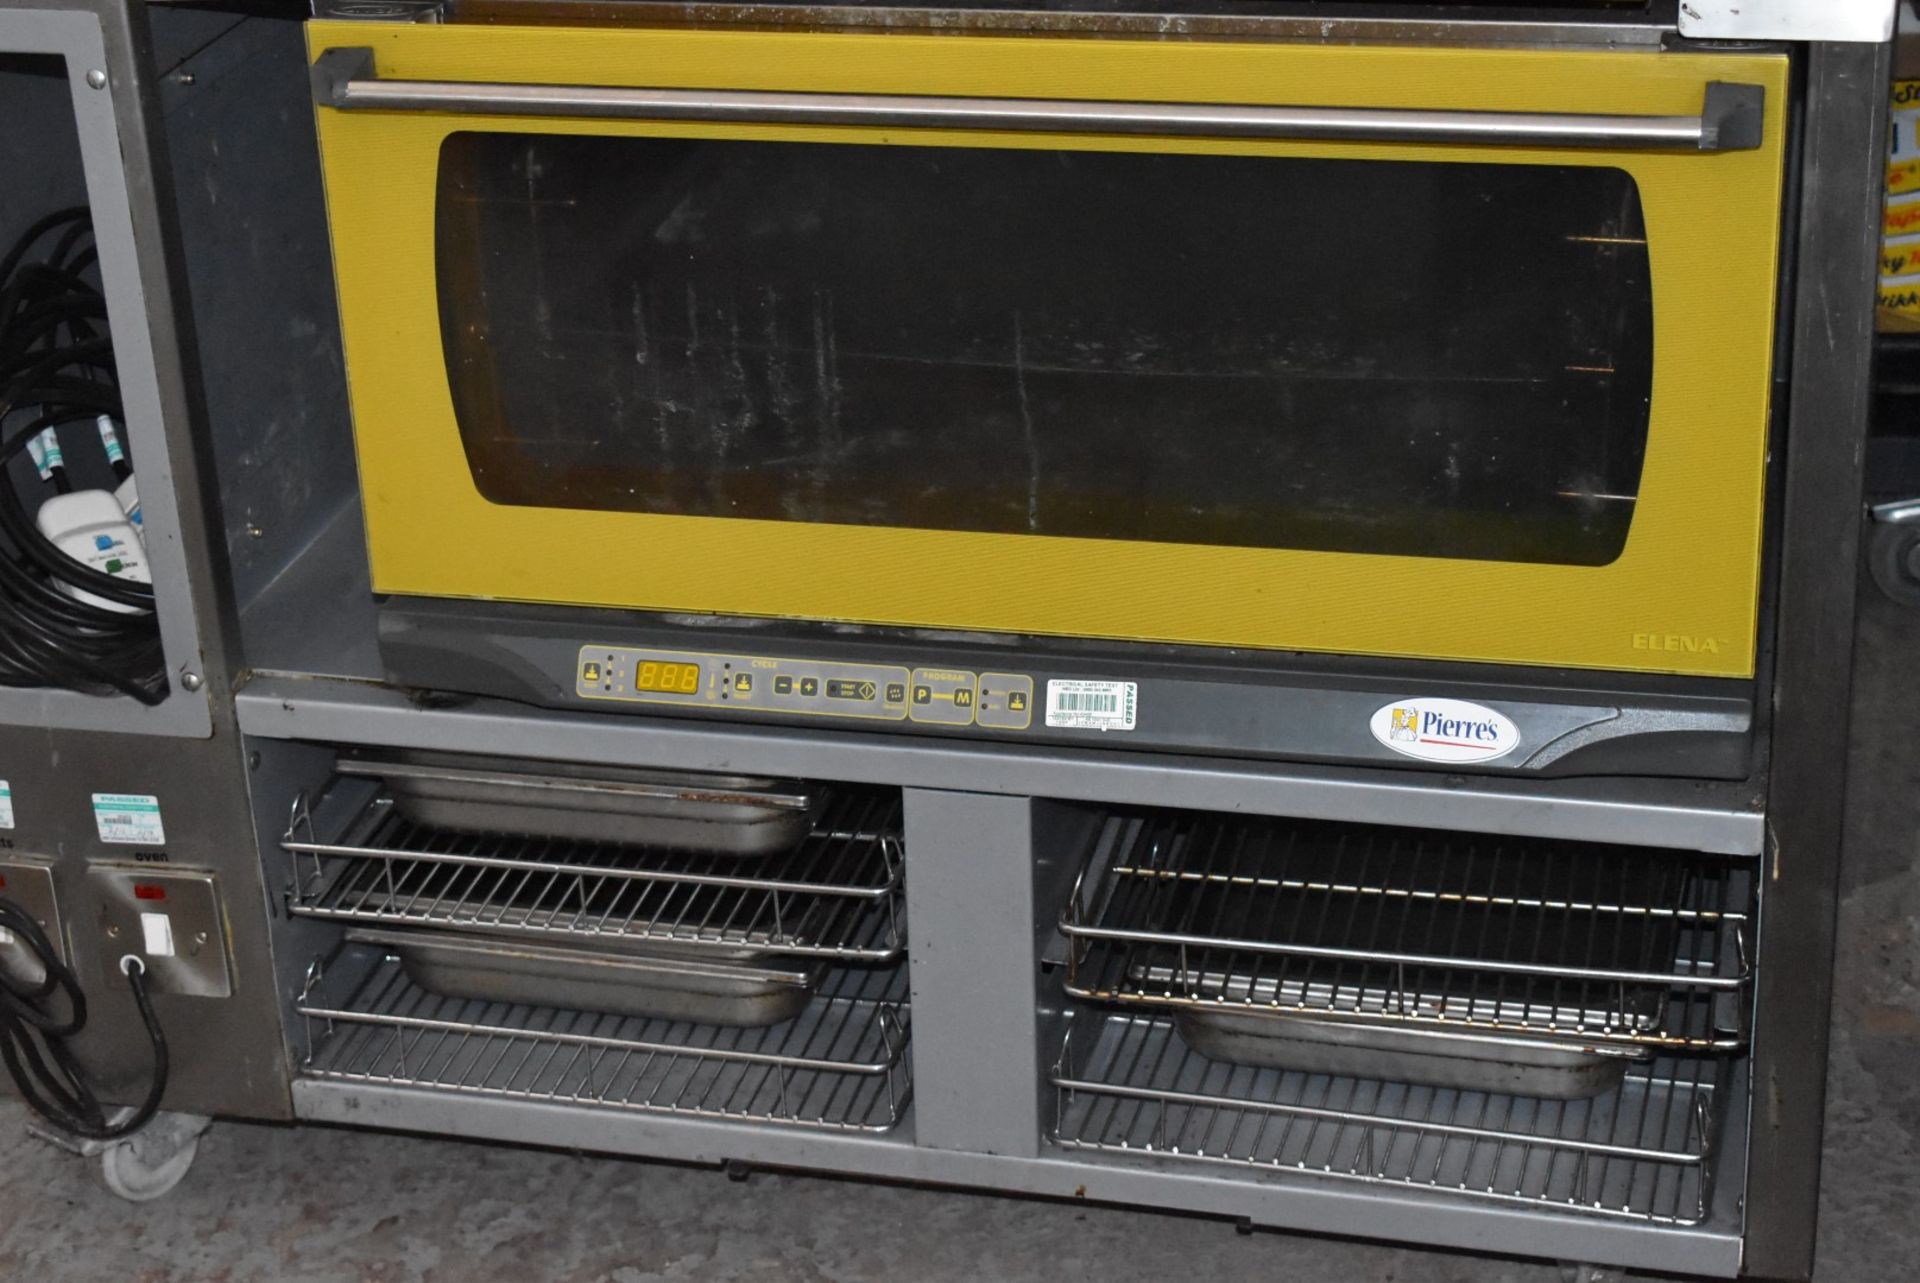 1 x Fri-Jado Mobile Cooking Station For Hot Foods - Includes Mobile Counter, Elena Cooking Oven - Image 7 of 10